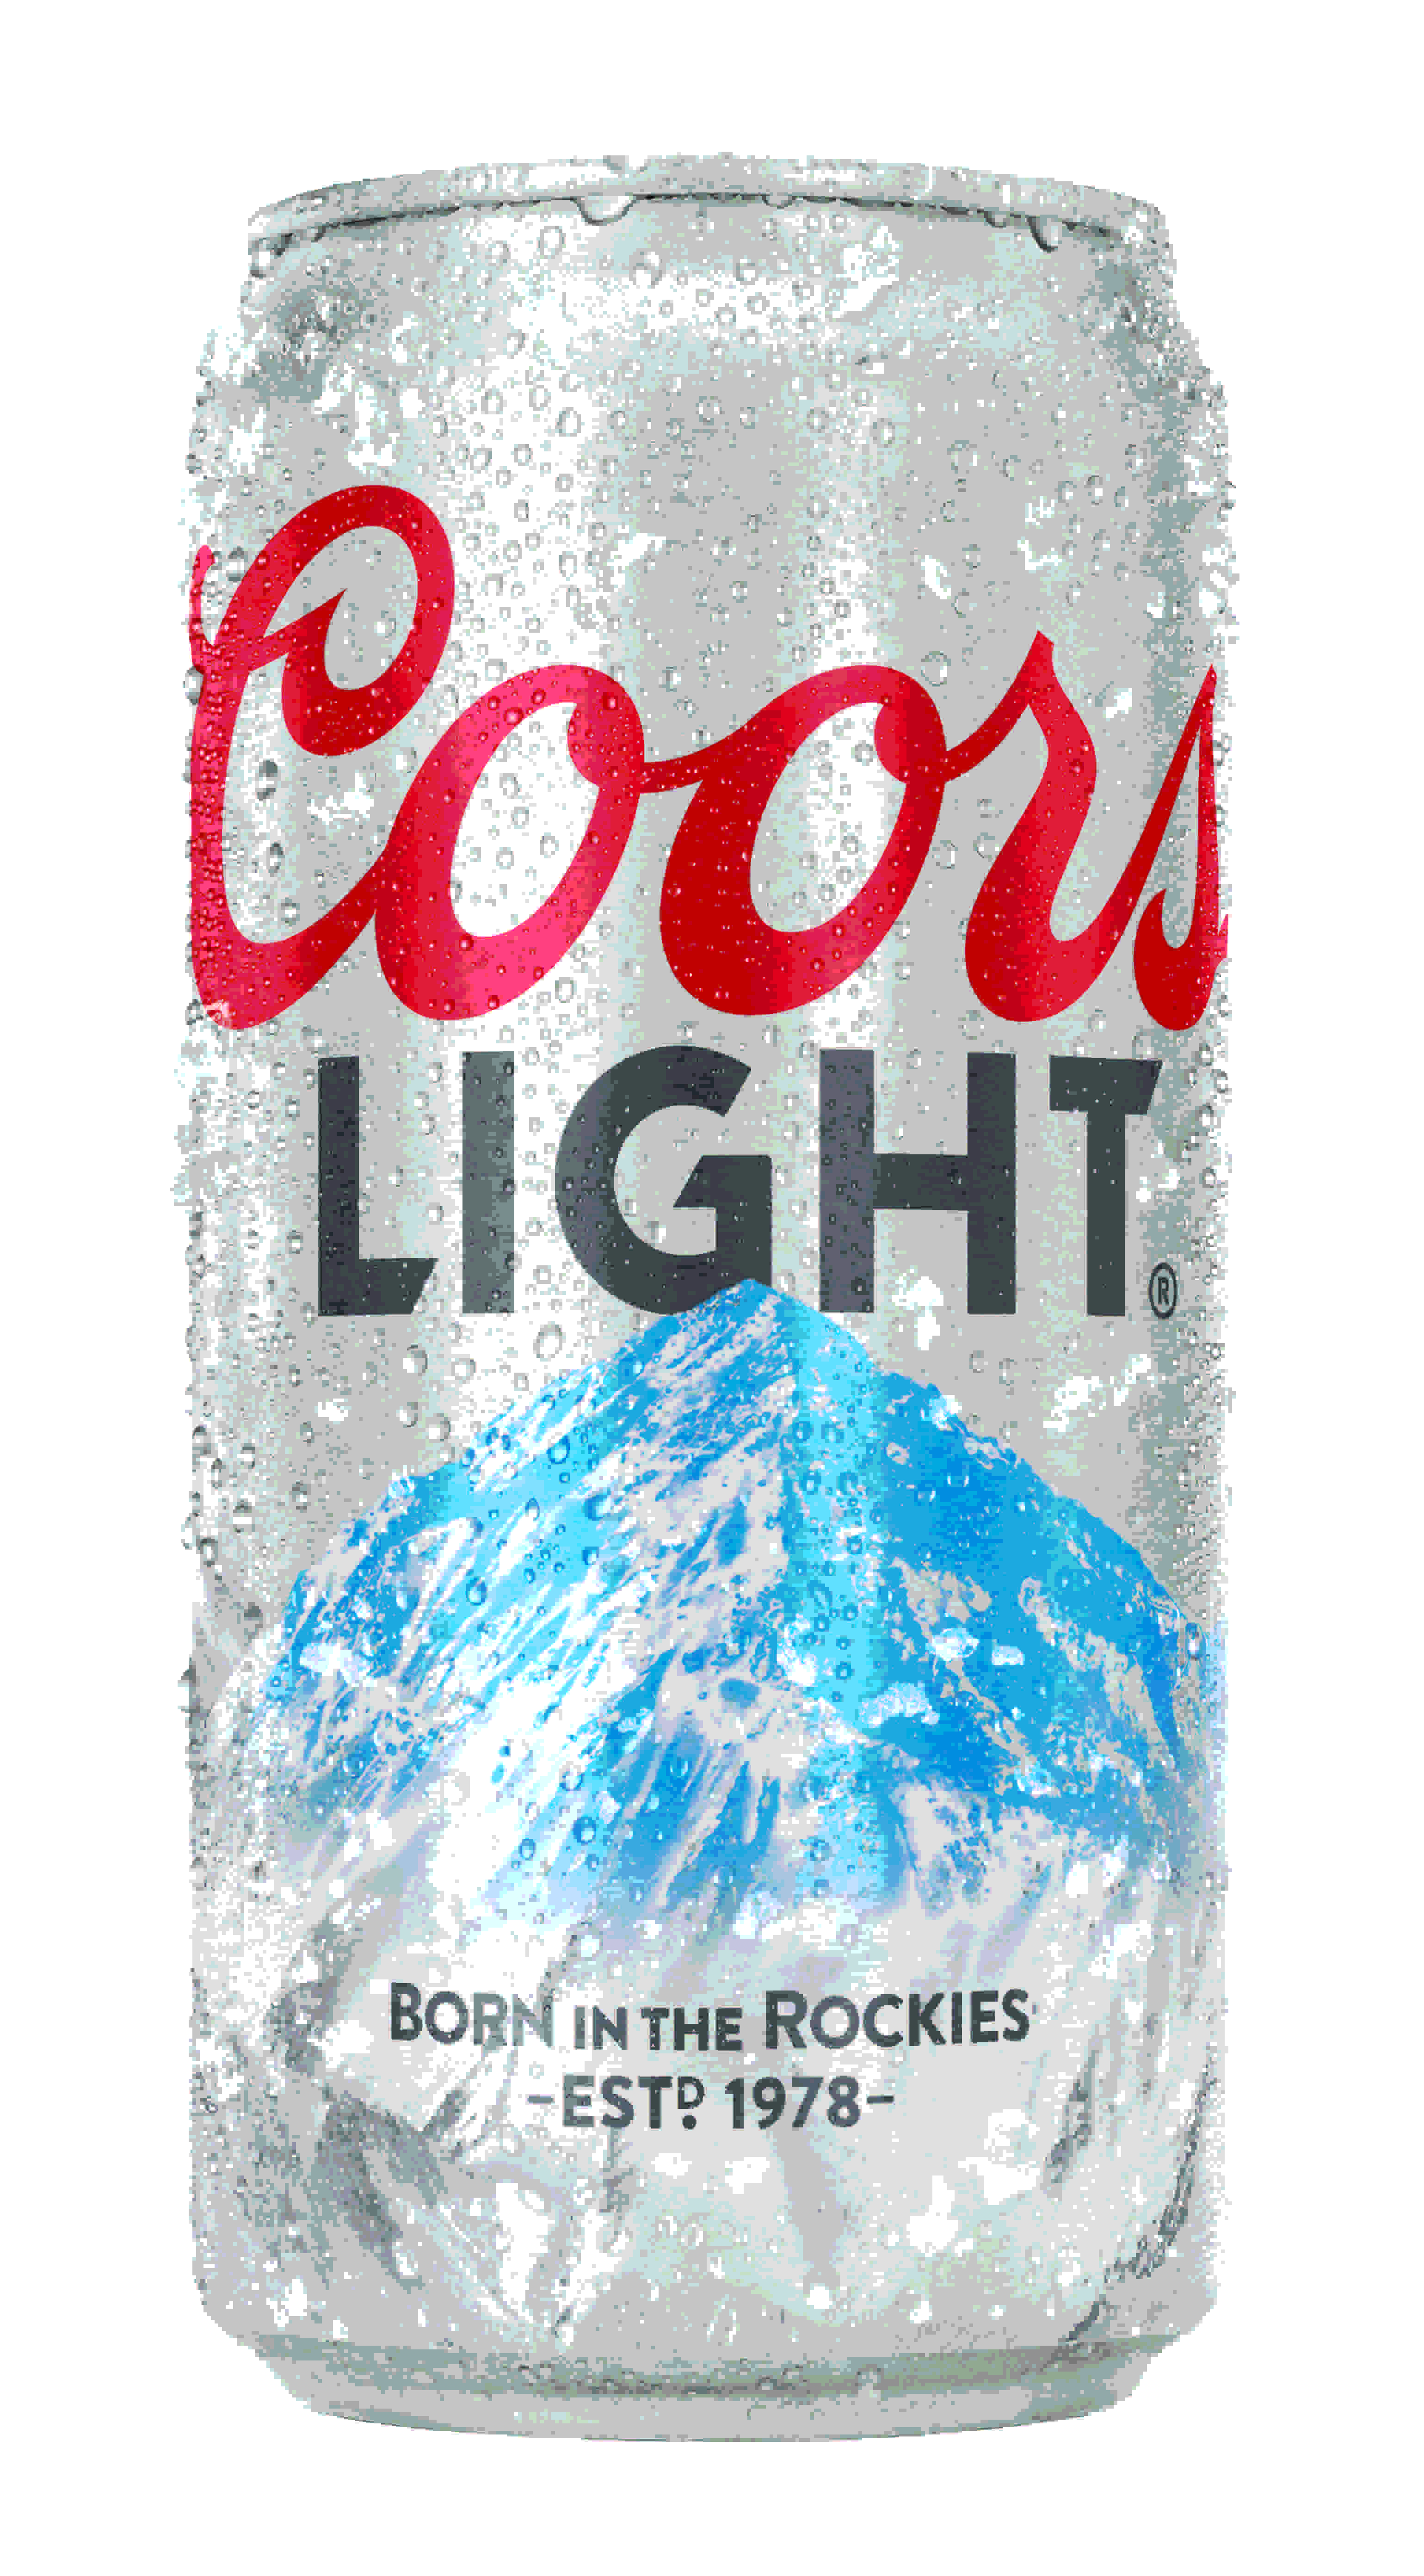 Old Coors Light Logo - The new look of Coors Light | MillerCoors blog